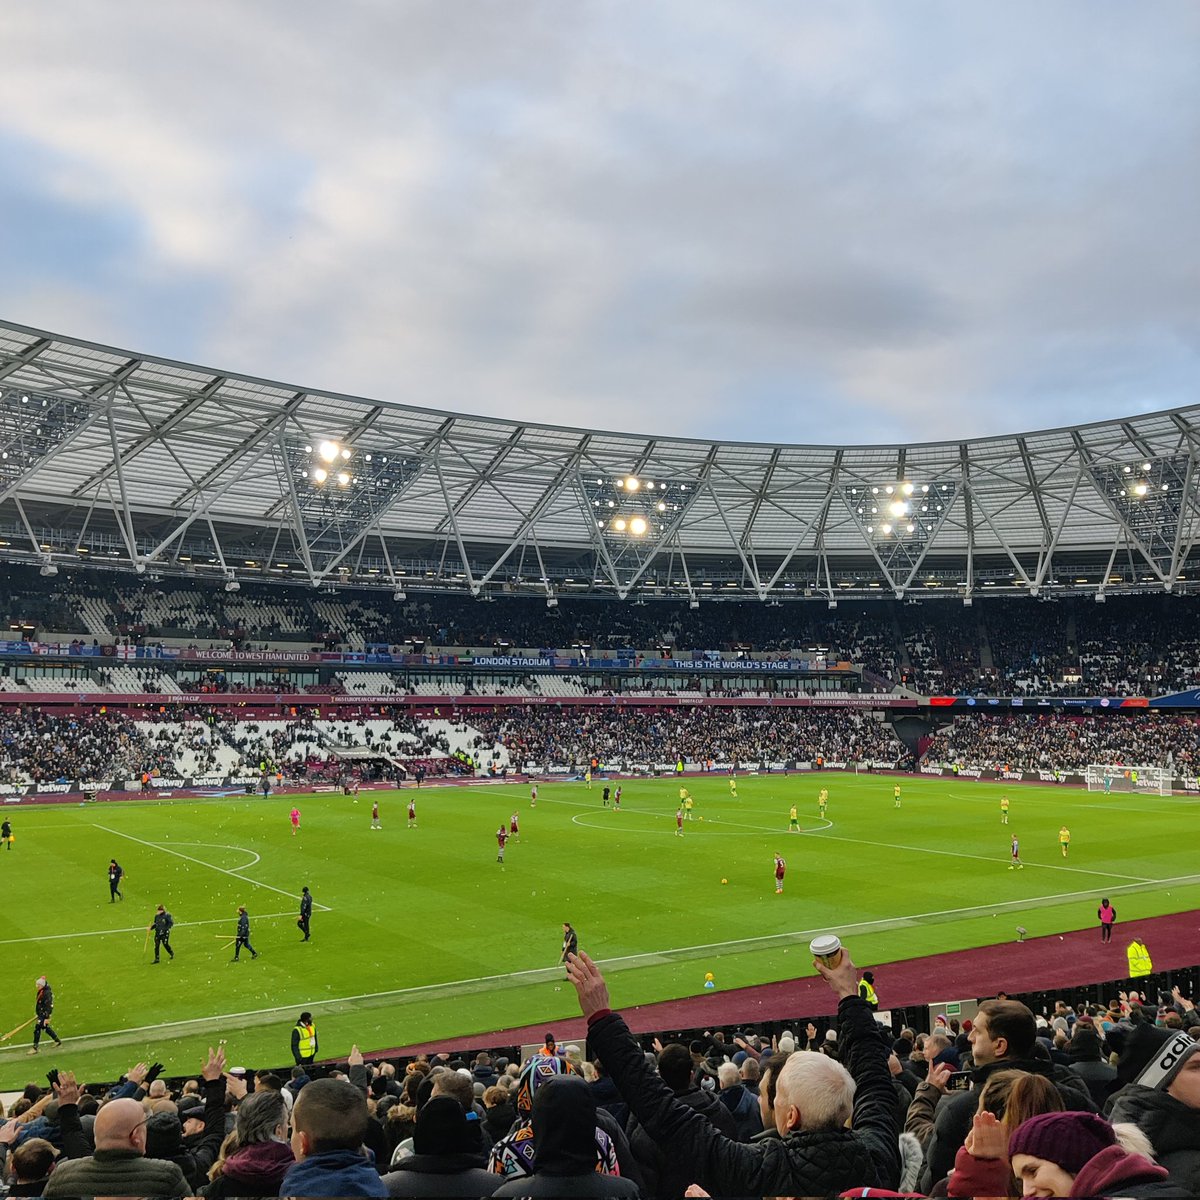 Disappointing result yesterday but a trip to Bristol to look forward to... Hopefully those injuries aren't too serious! 🤞⚒️ #LGBTQ #WHUFC